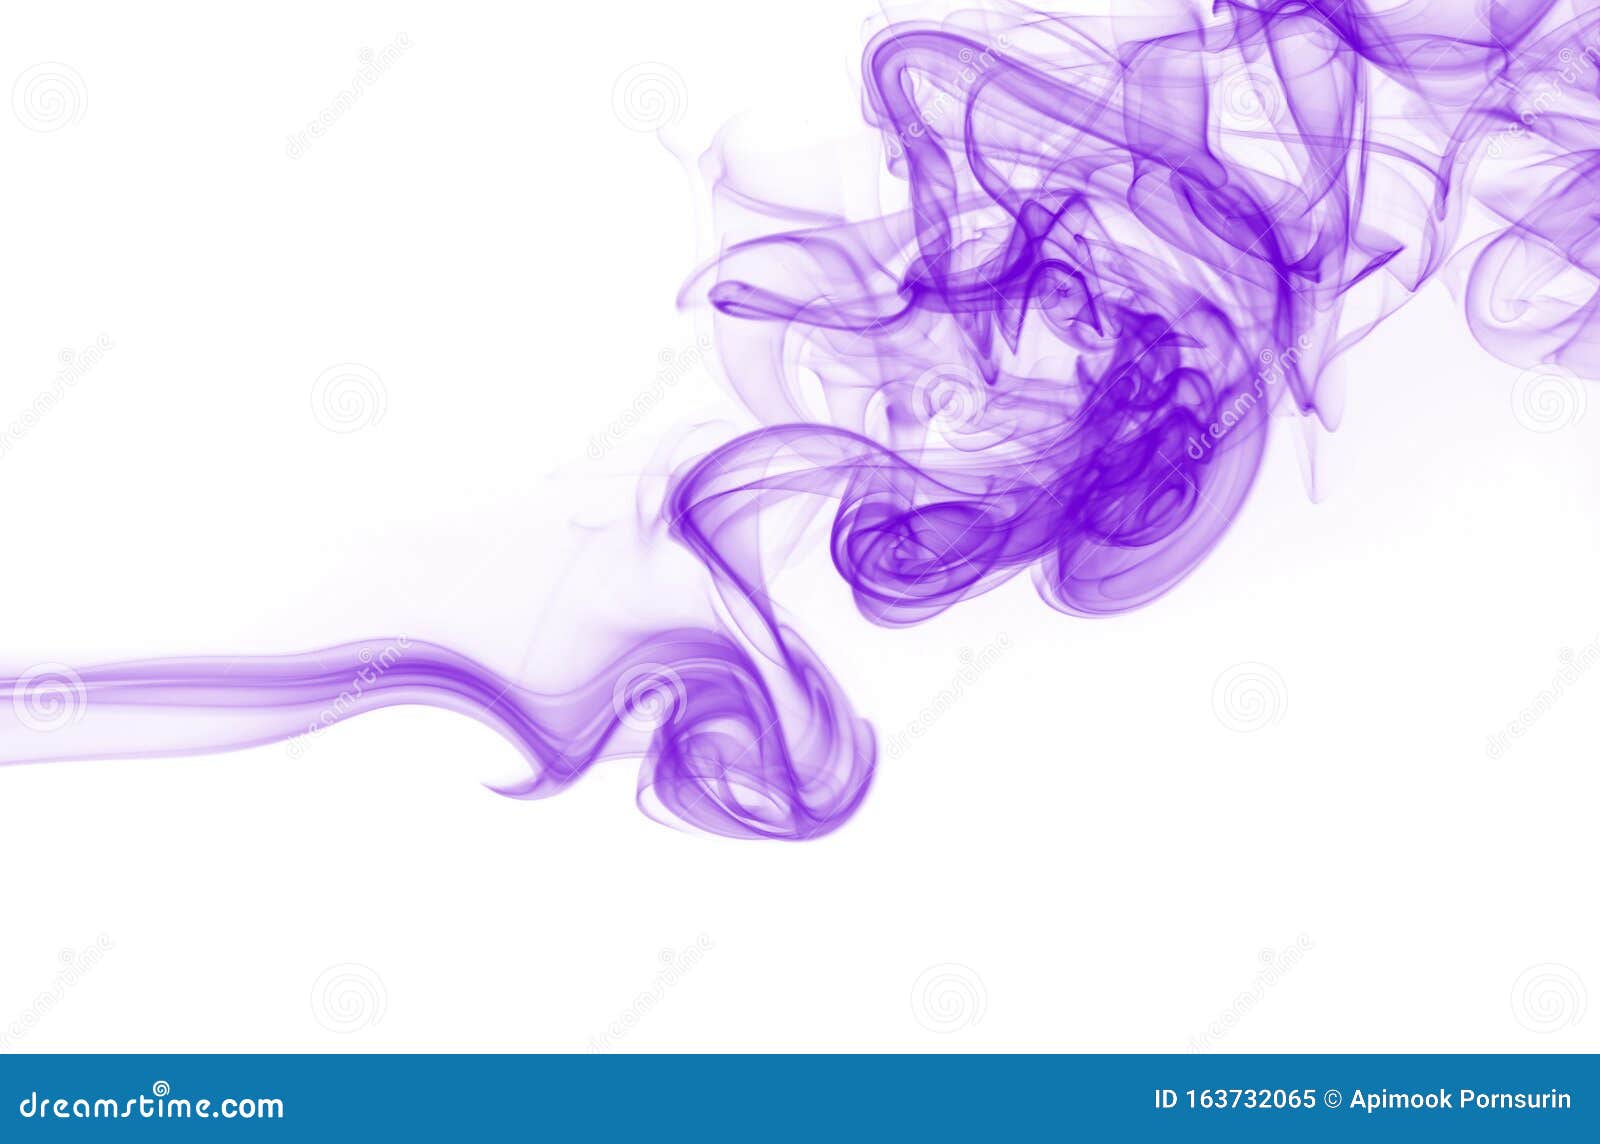 movement of purple smoke abstract on white background